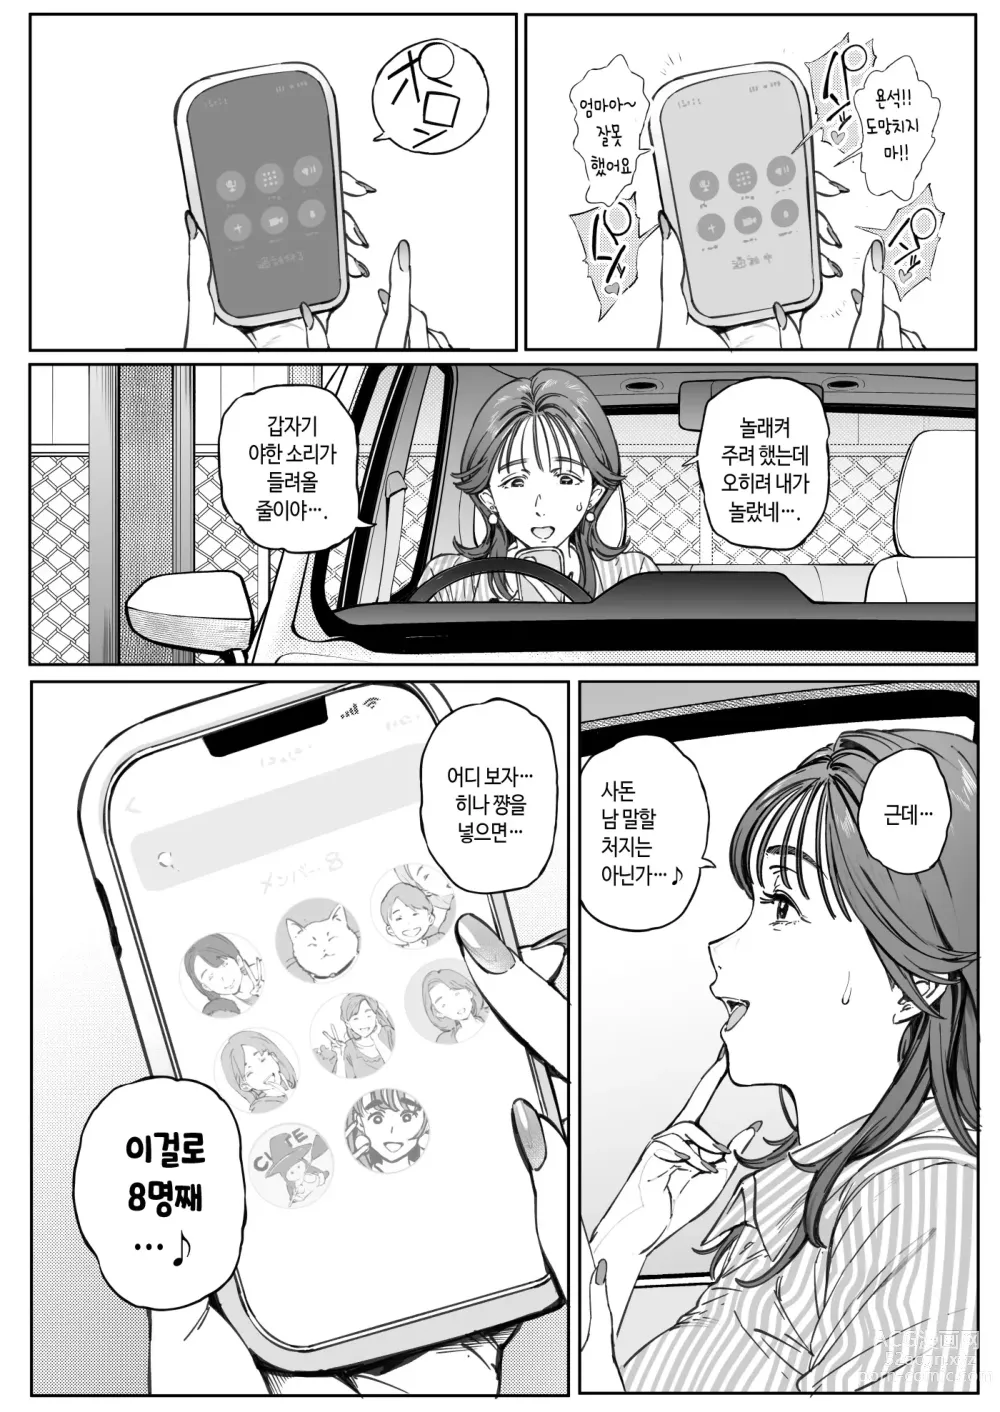 Page 101 of doujinshi 익애 관찰 일기